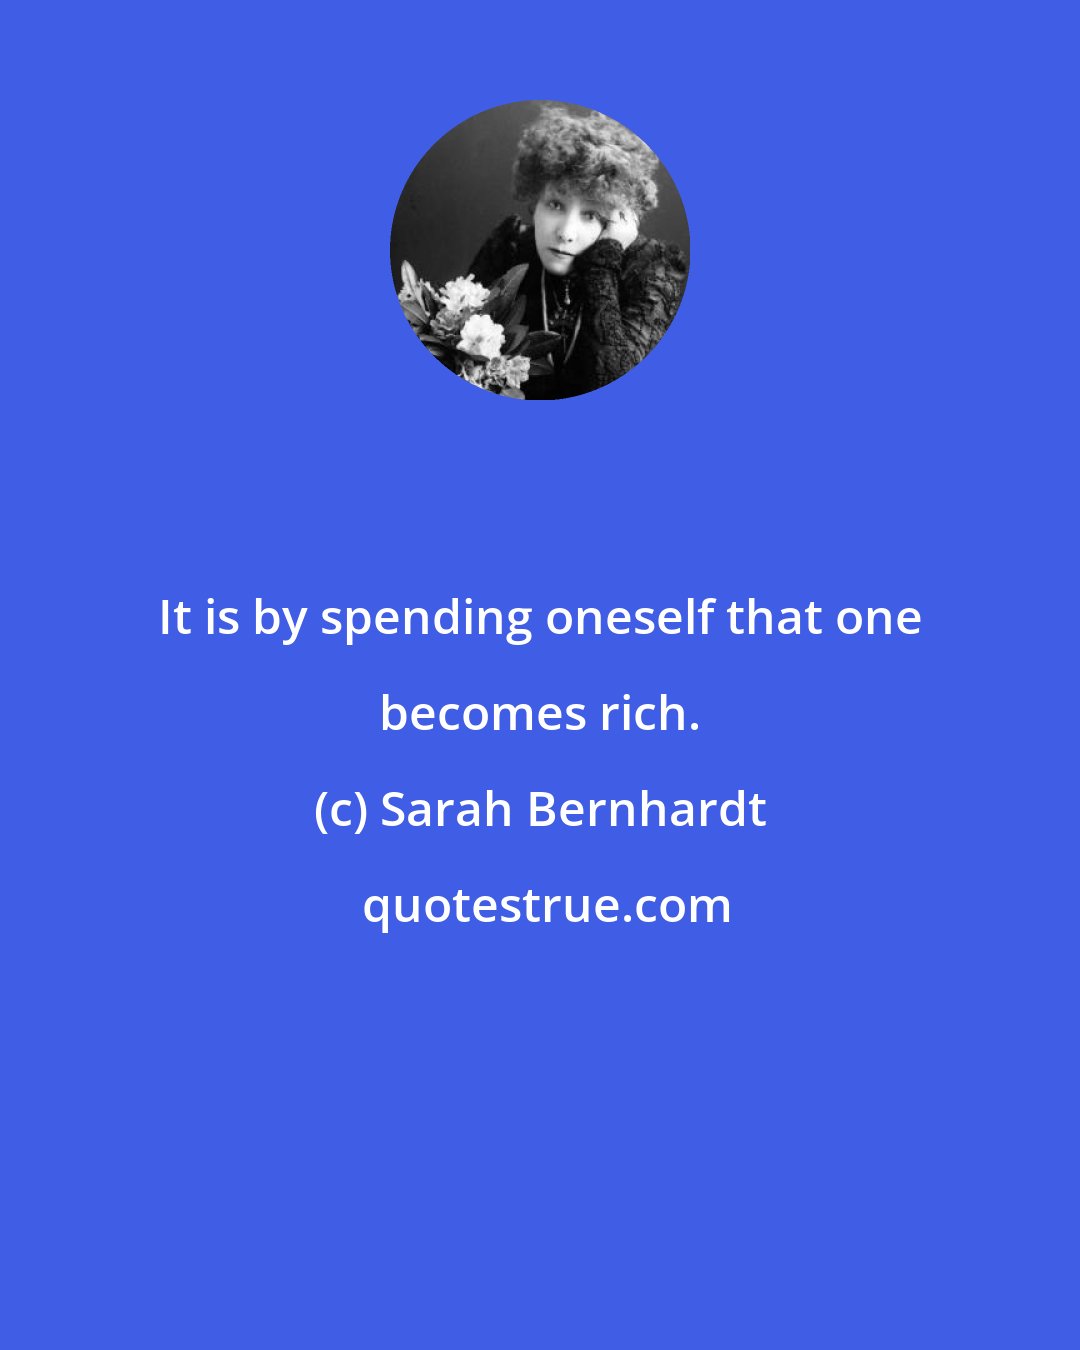 Sarah Bernhardt: It is by spending oneself that one becomes rich.